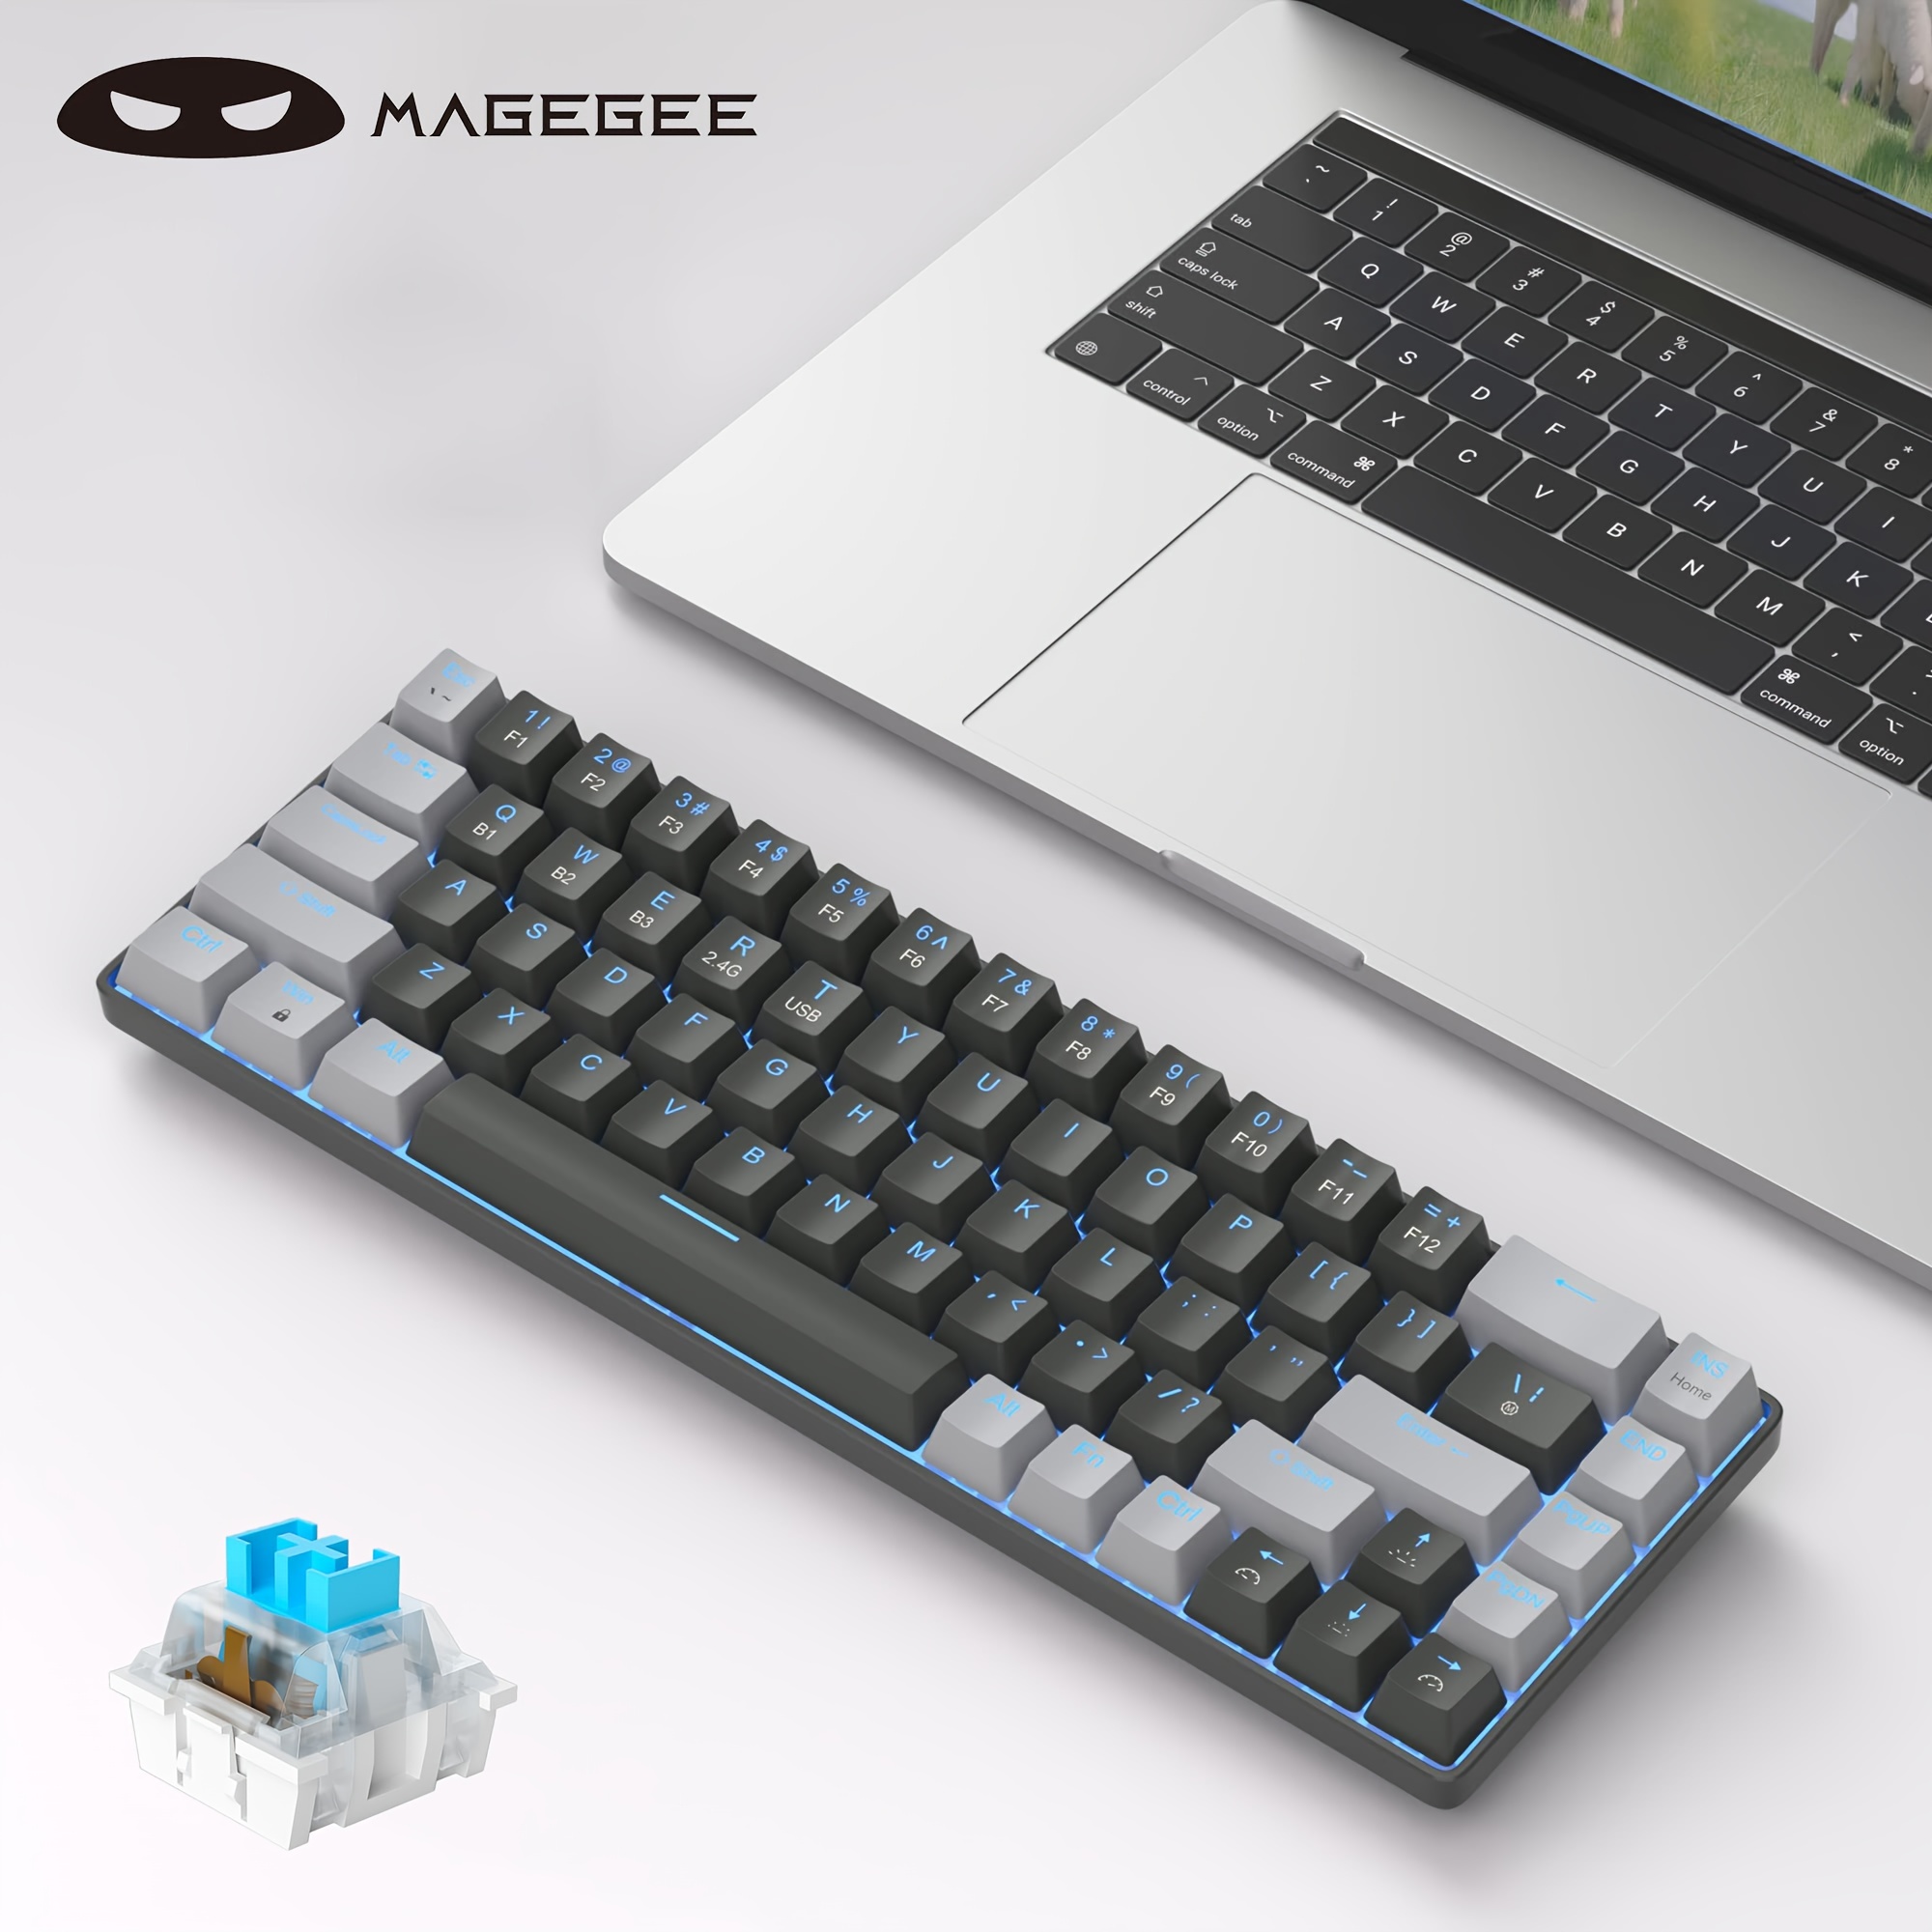 

Magegee 60 Percent Wireless Mechanical Keyboard, 2.4g/bt5.1/usb-c Mini Gaming Keyboard With Blue Switch, 68 Keys Compact Blue Backlit Office Keyboard For Pc Laptop Smartphone, Black/grey